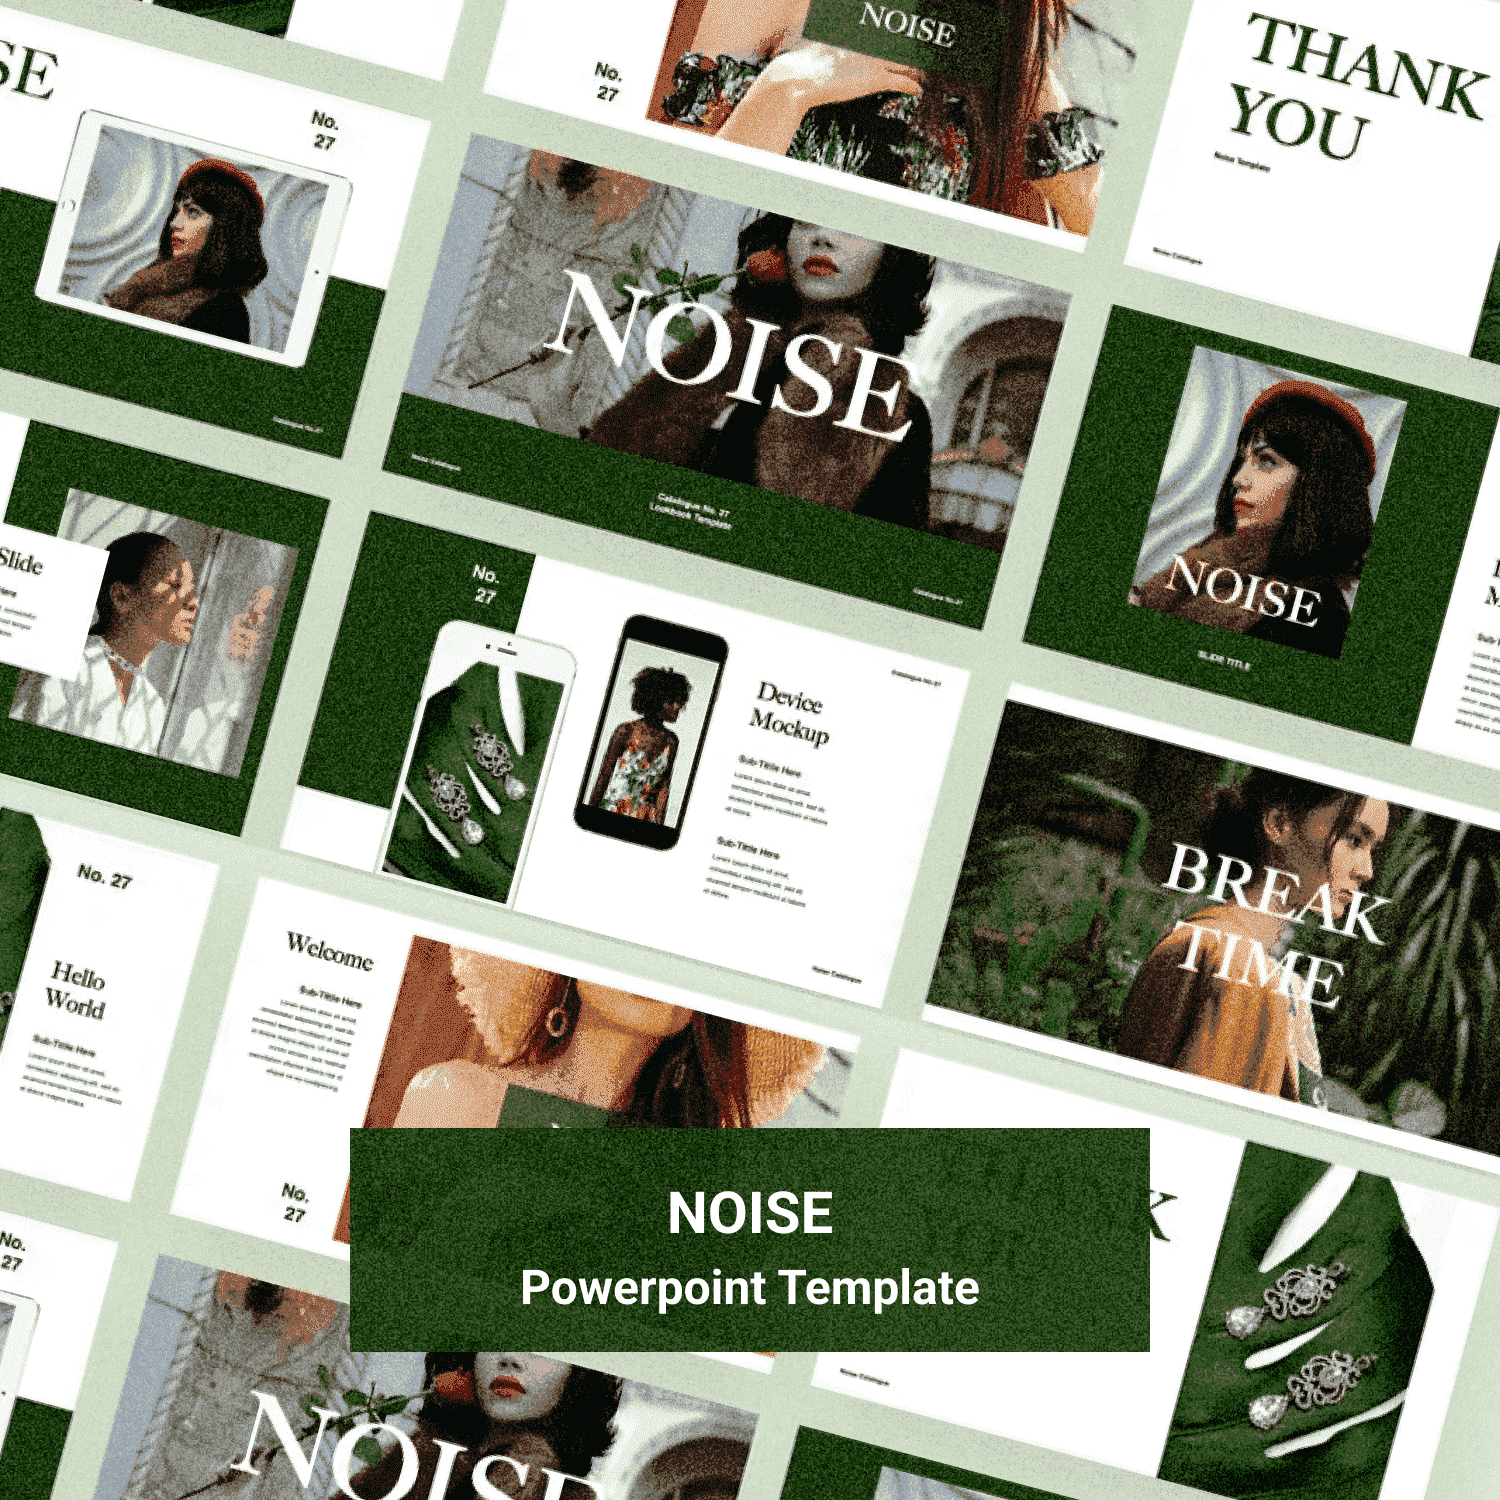 NOISE - Powerpoin Template Preview.